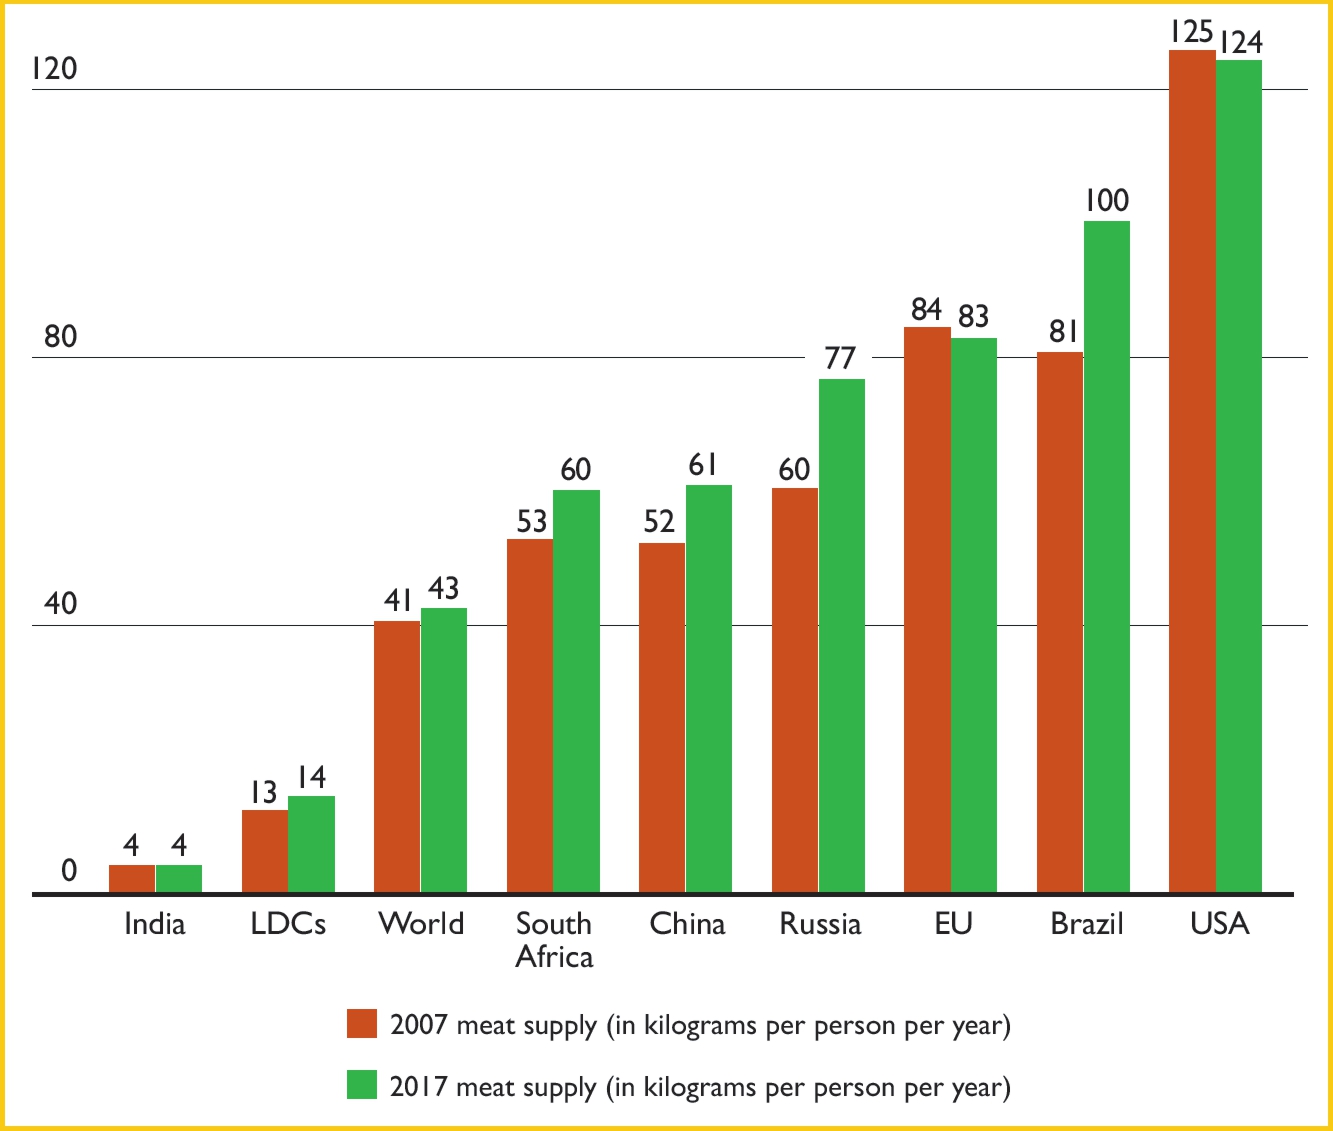 Meat supply in kilogram per person per year in the BRICS countries, the EU, the world’s least developed countries (LDCs) and the global average. Data for 2007 and 2017 from FAO Food Balances (2017 figures were calculated on a slightly amended methodology and with revised population figures).